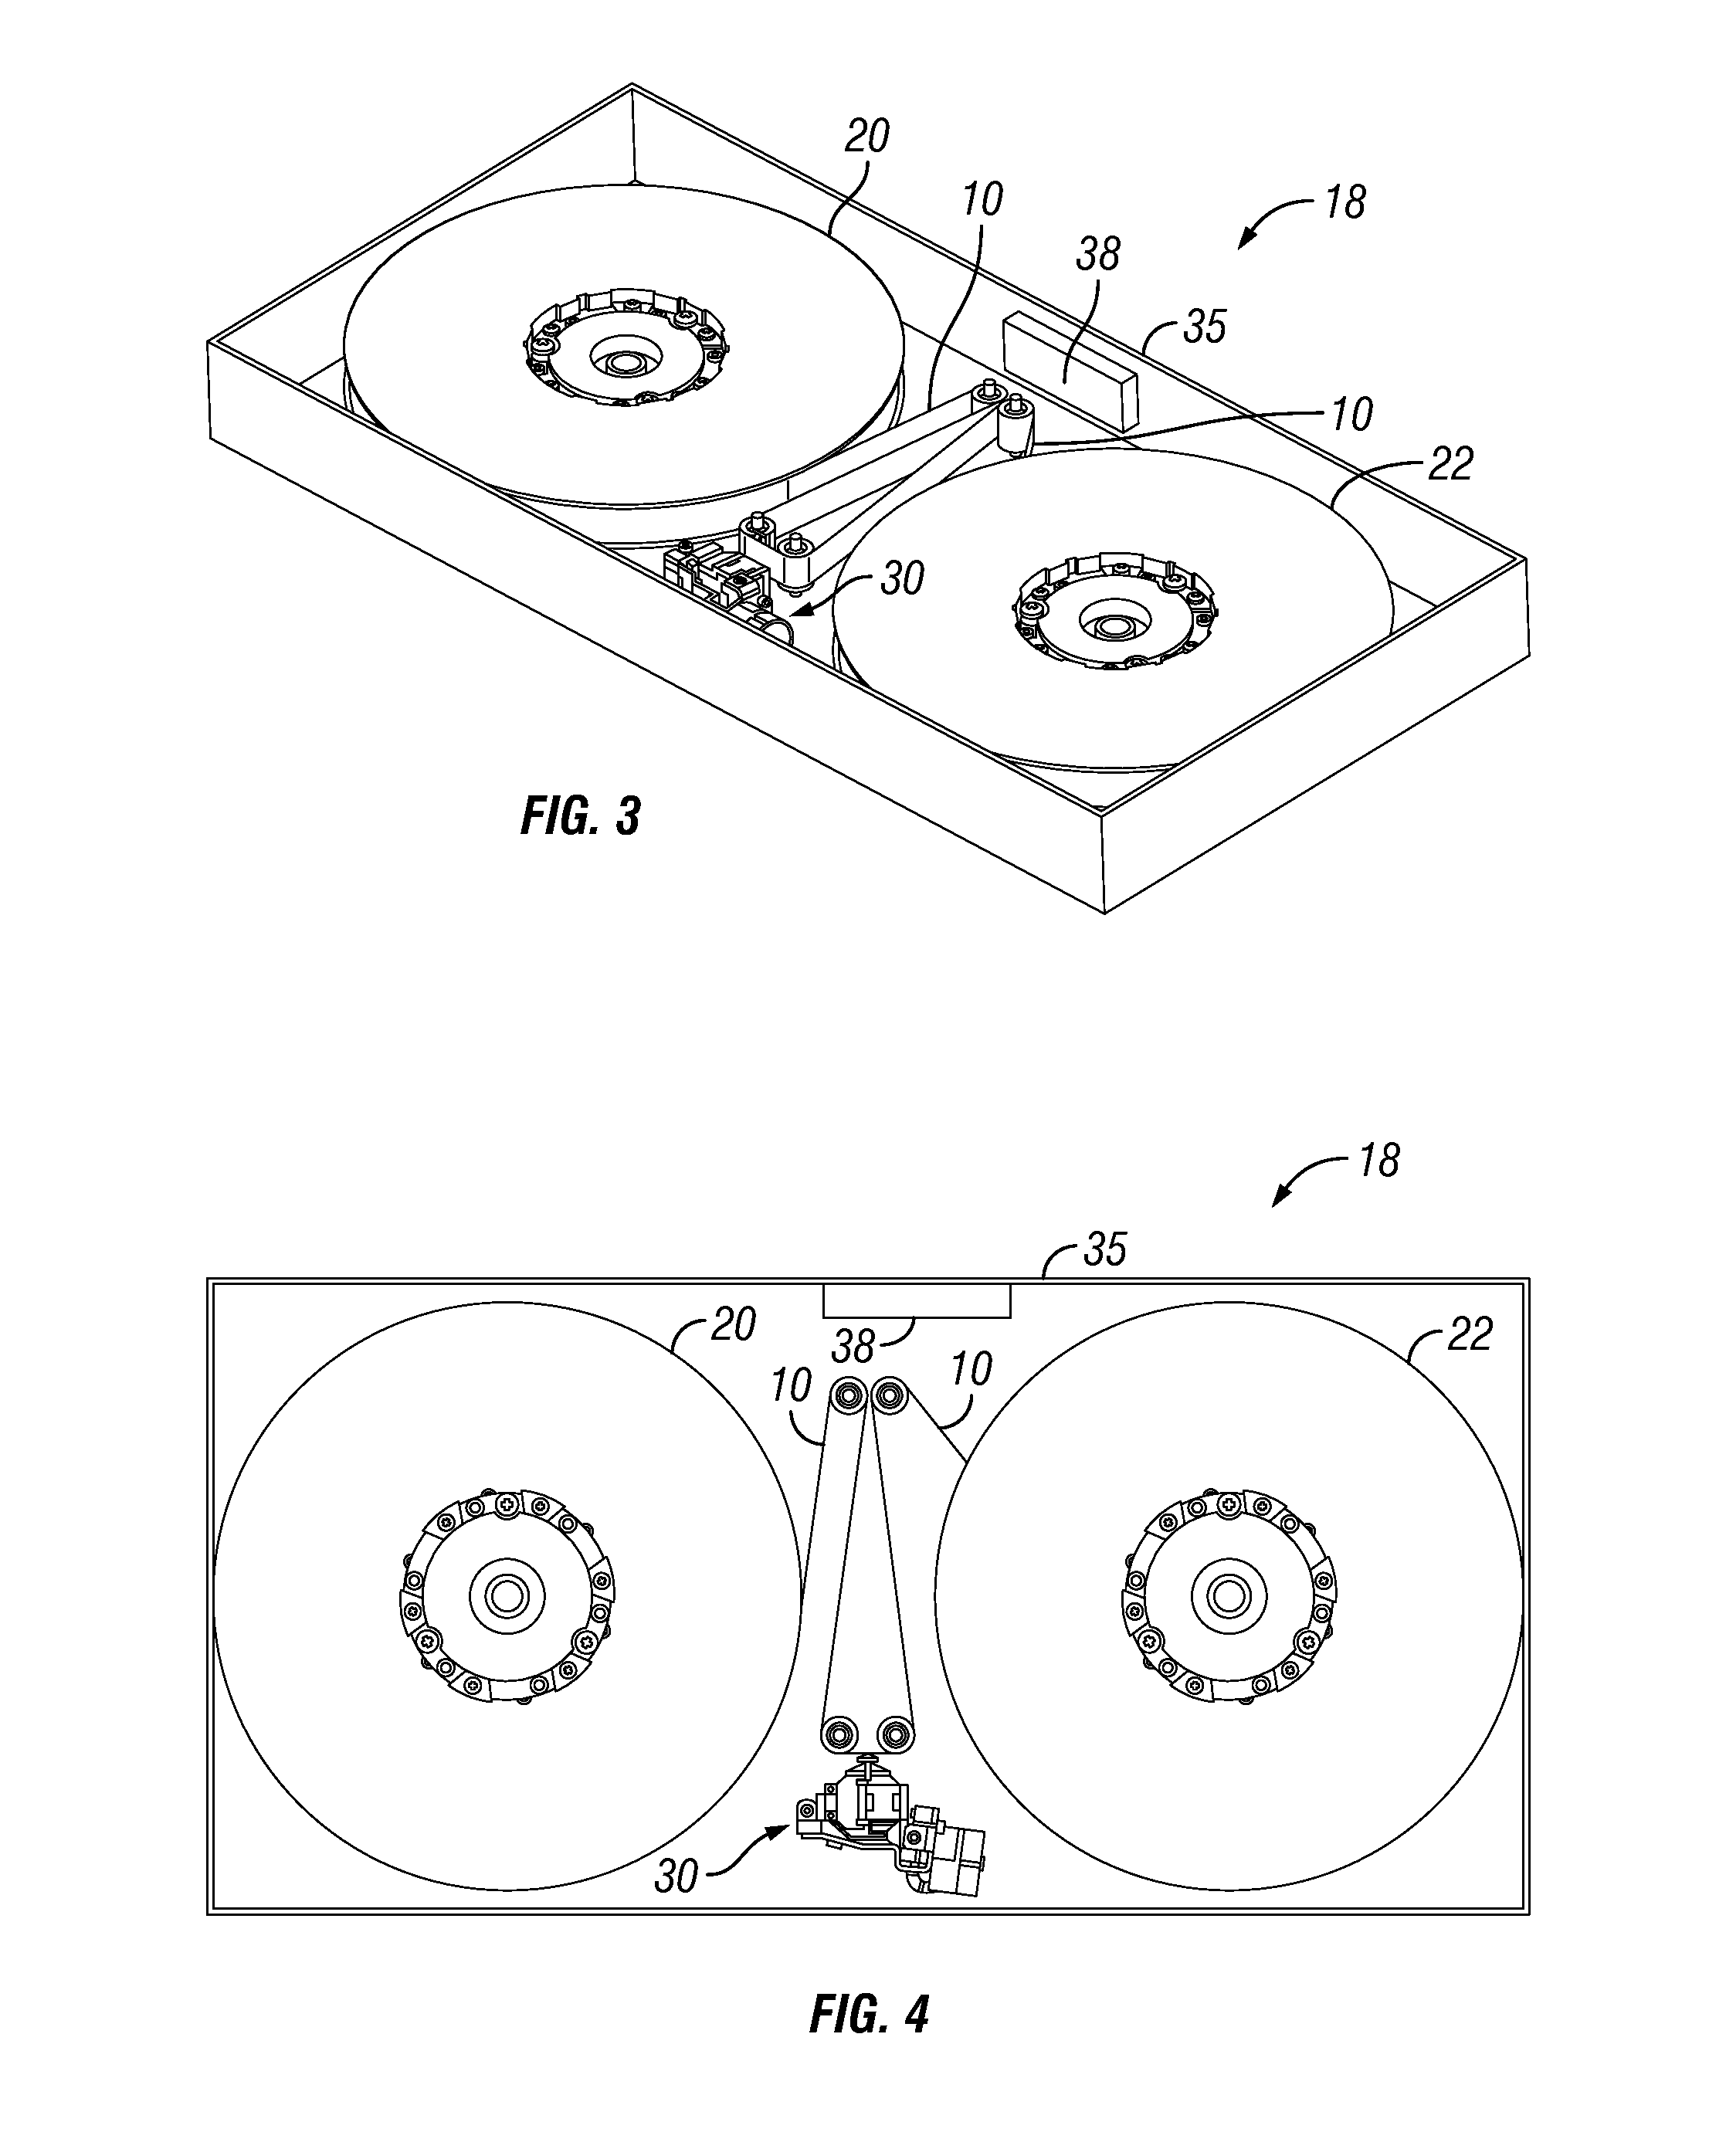 Self-contained magnetic tape drive and combined multi-part tape system